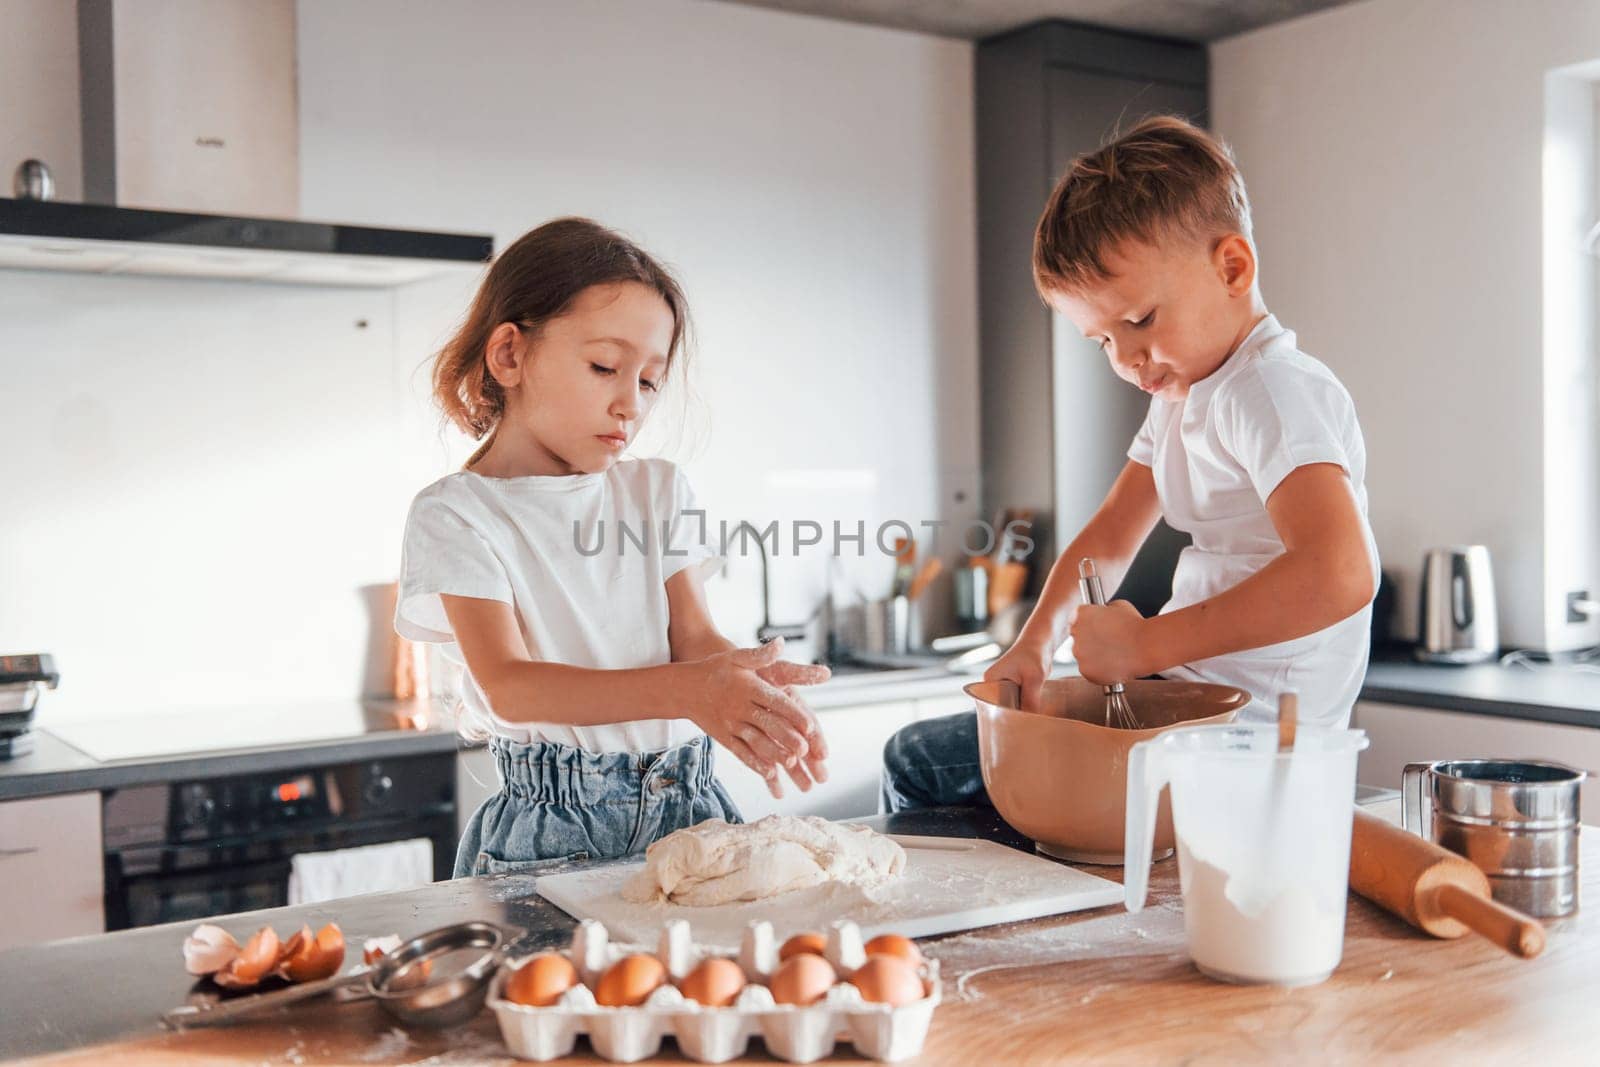 Making sweets. Little boy and girl preparing Christmas cookies on the kitchen by Standret